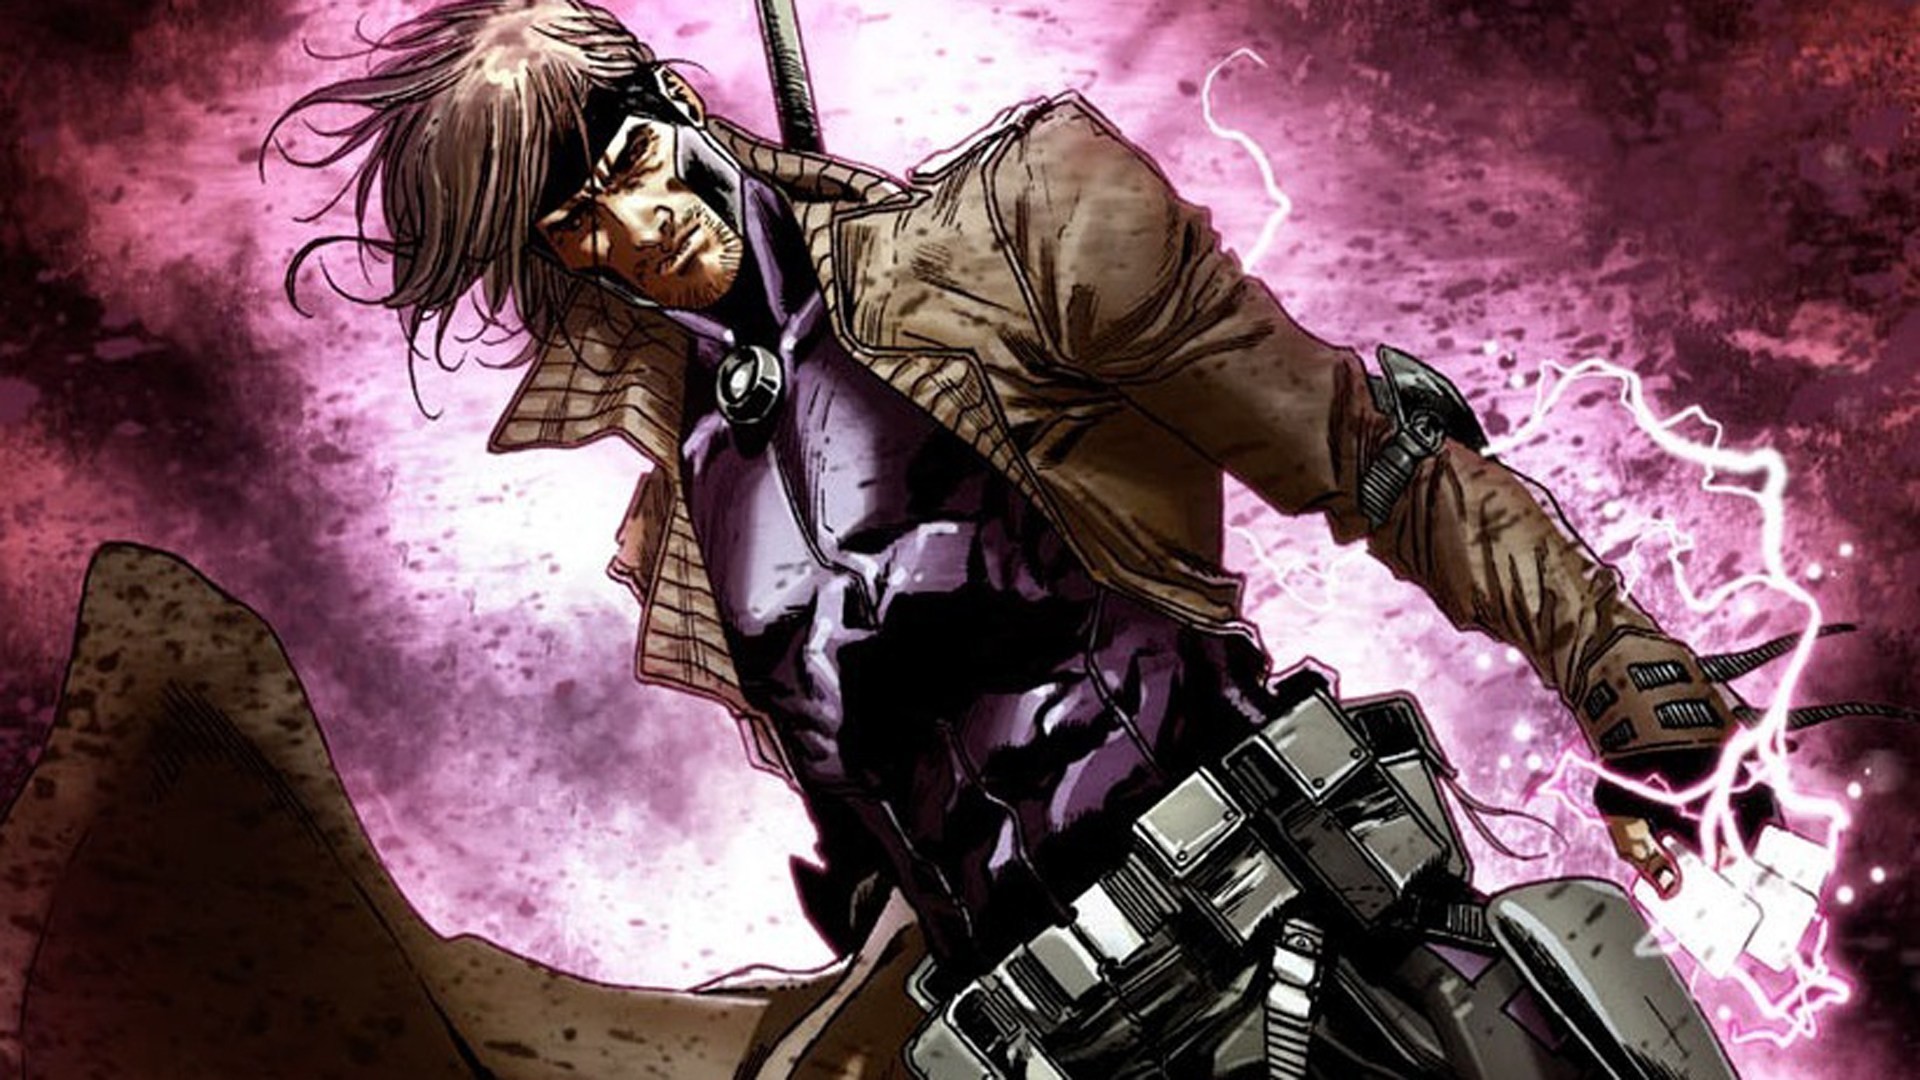 1920x1080 Gambit Spinoff Film Still in the Works, Says Channing Tatum – Geek Outpost